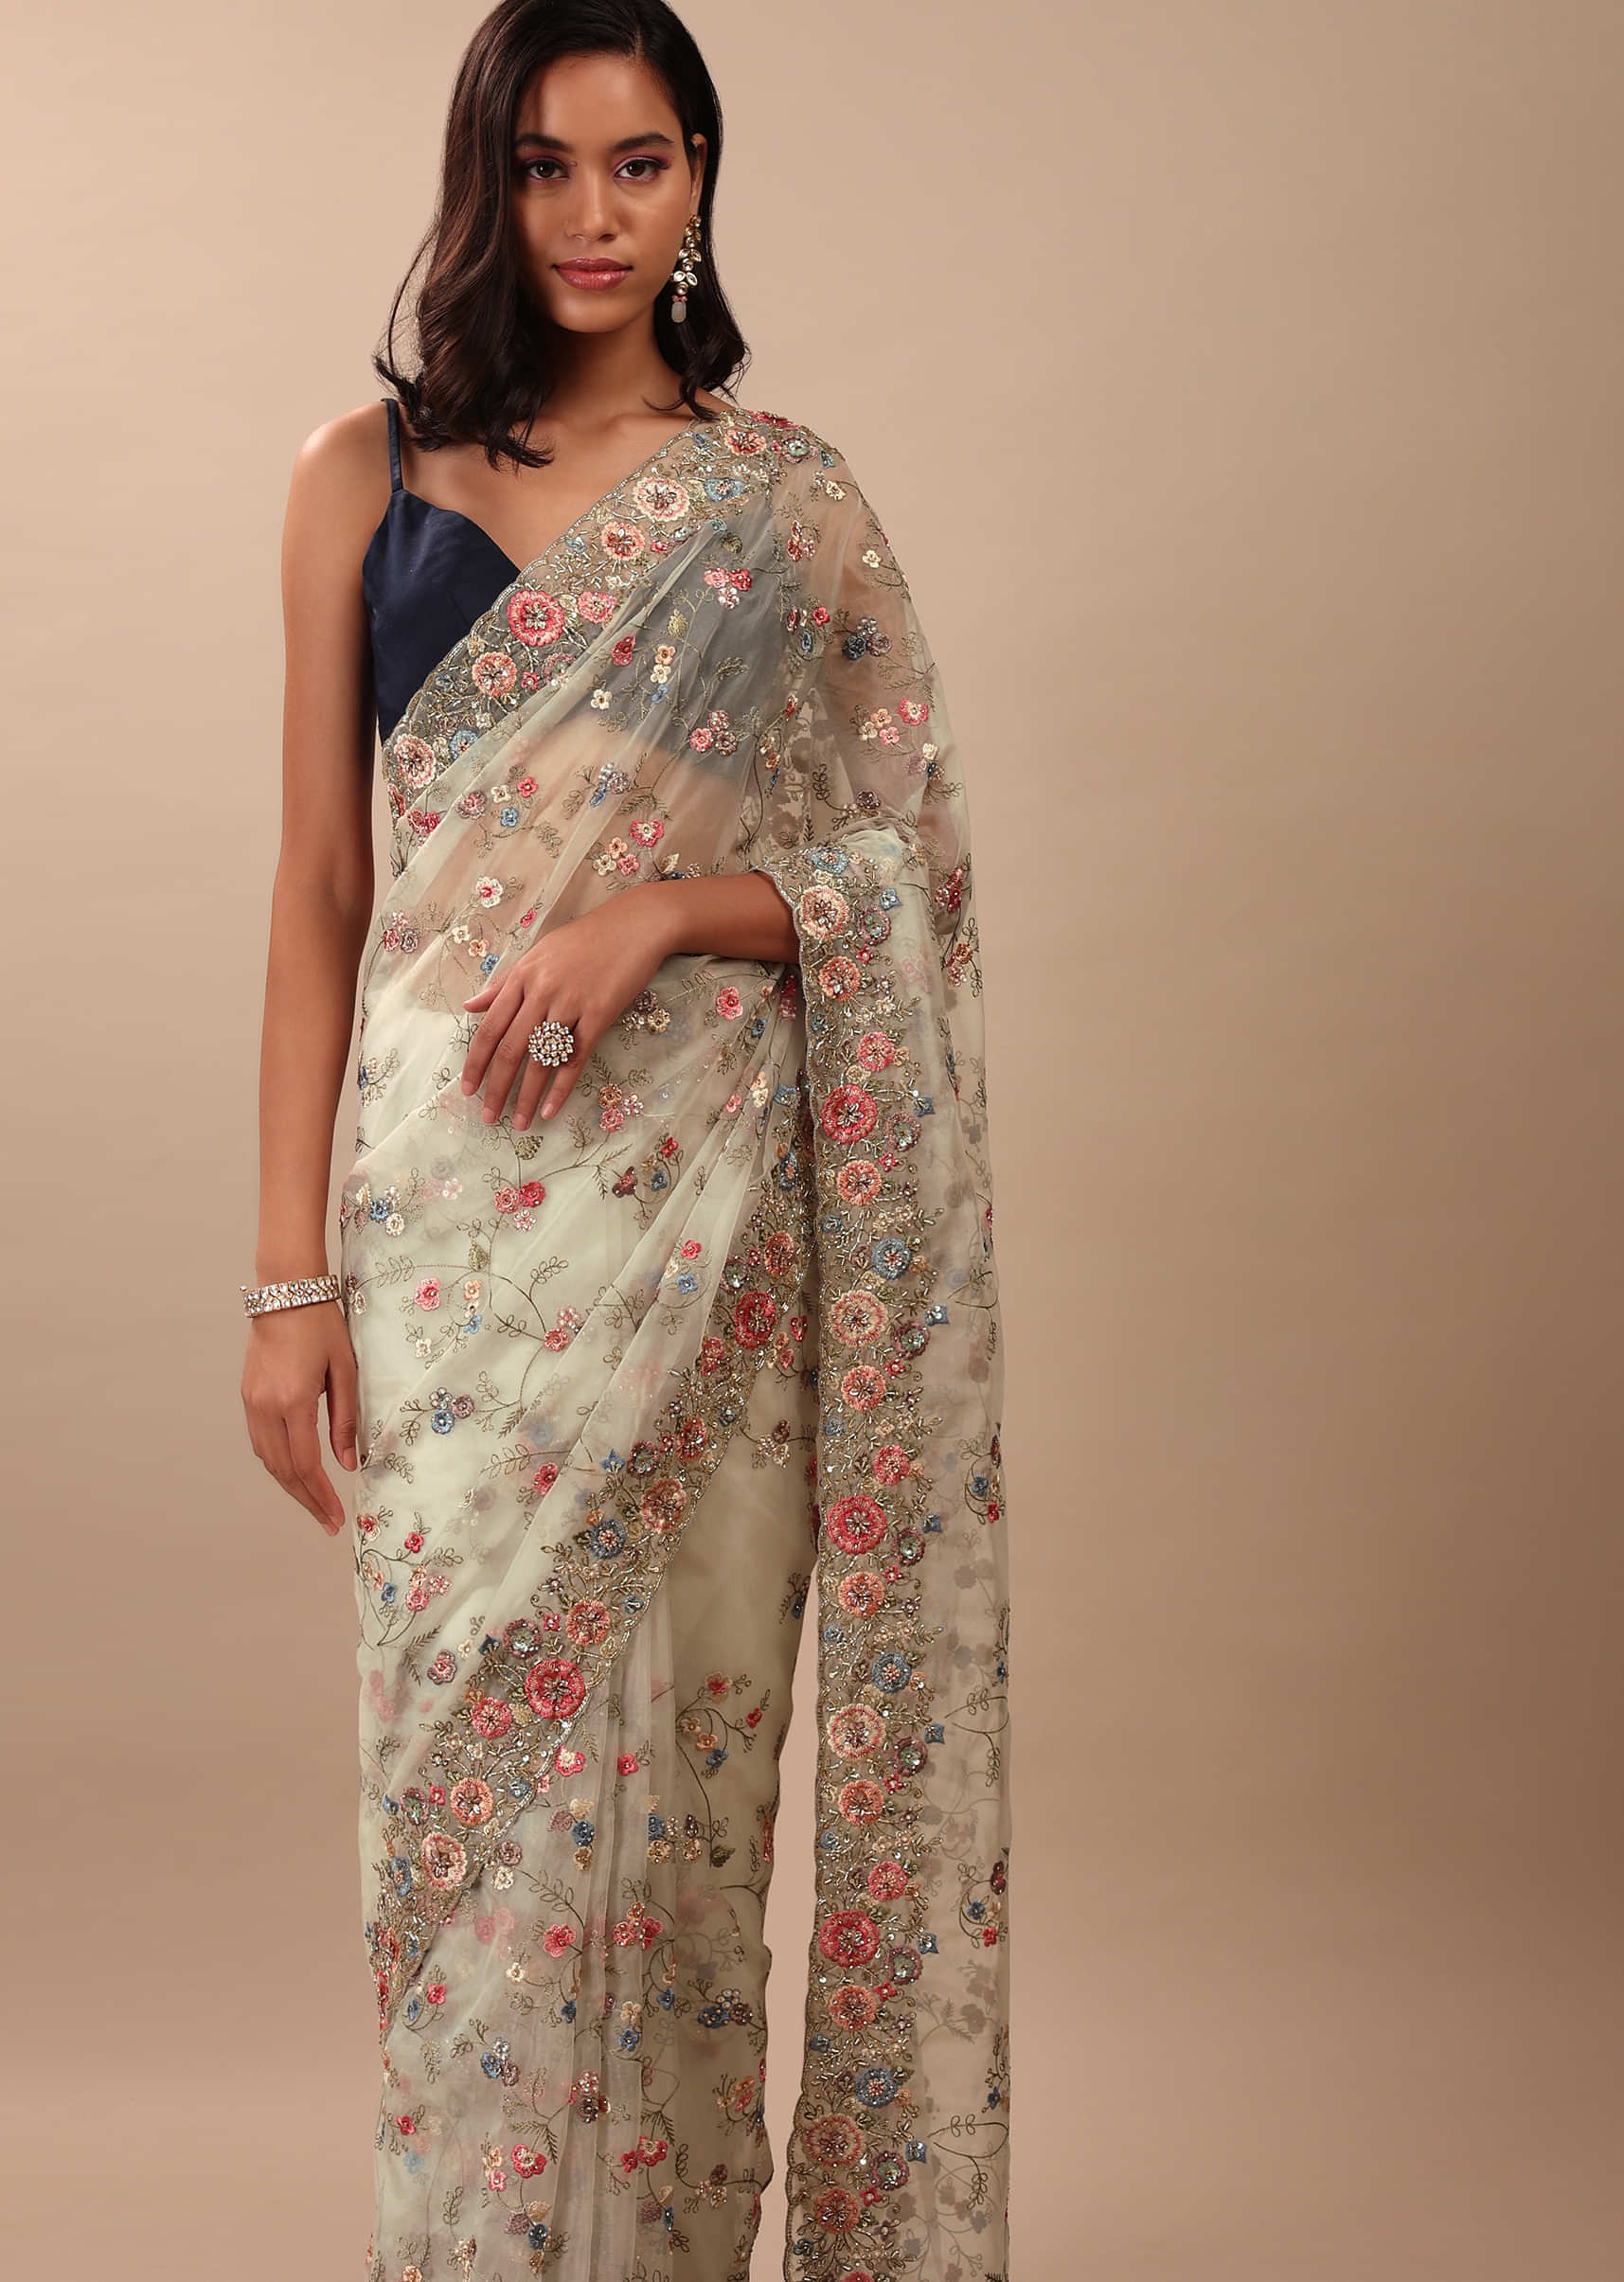 Pista Green Organza Saree Fully Embroidered In Multi-colour Floral Jaal Pattern With Cut Dana & Moti